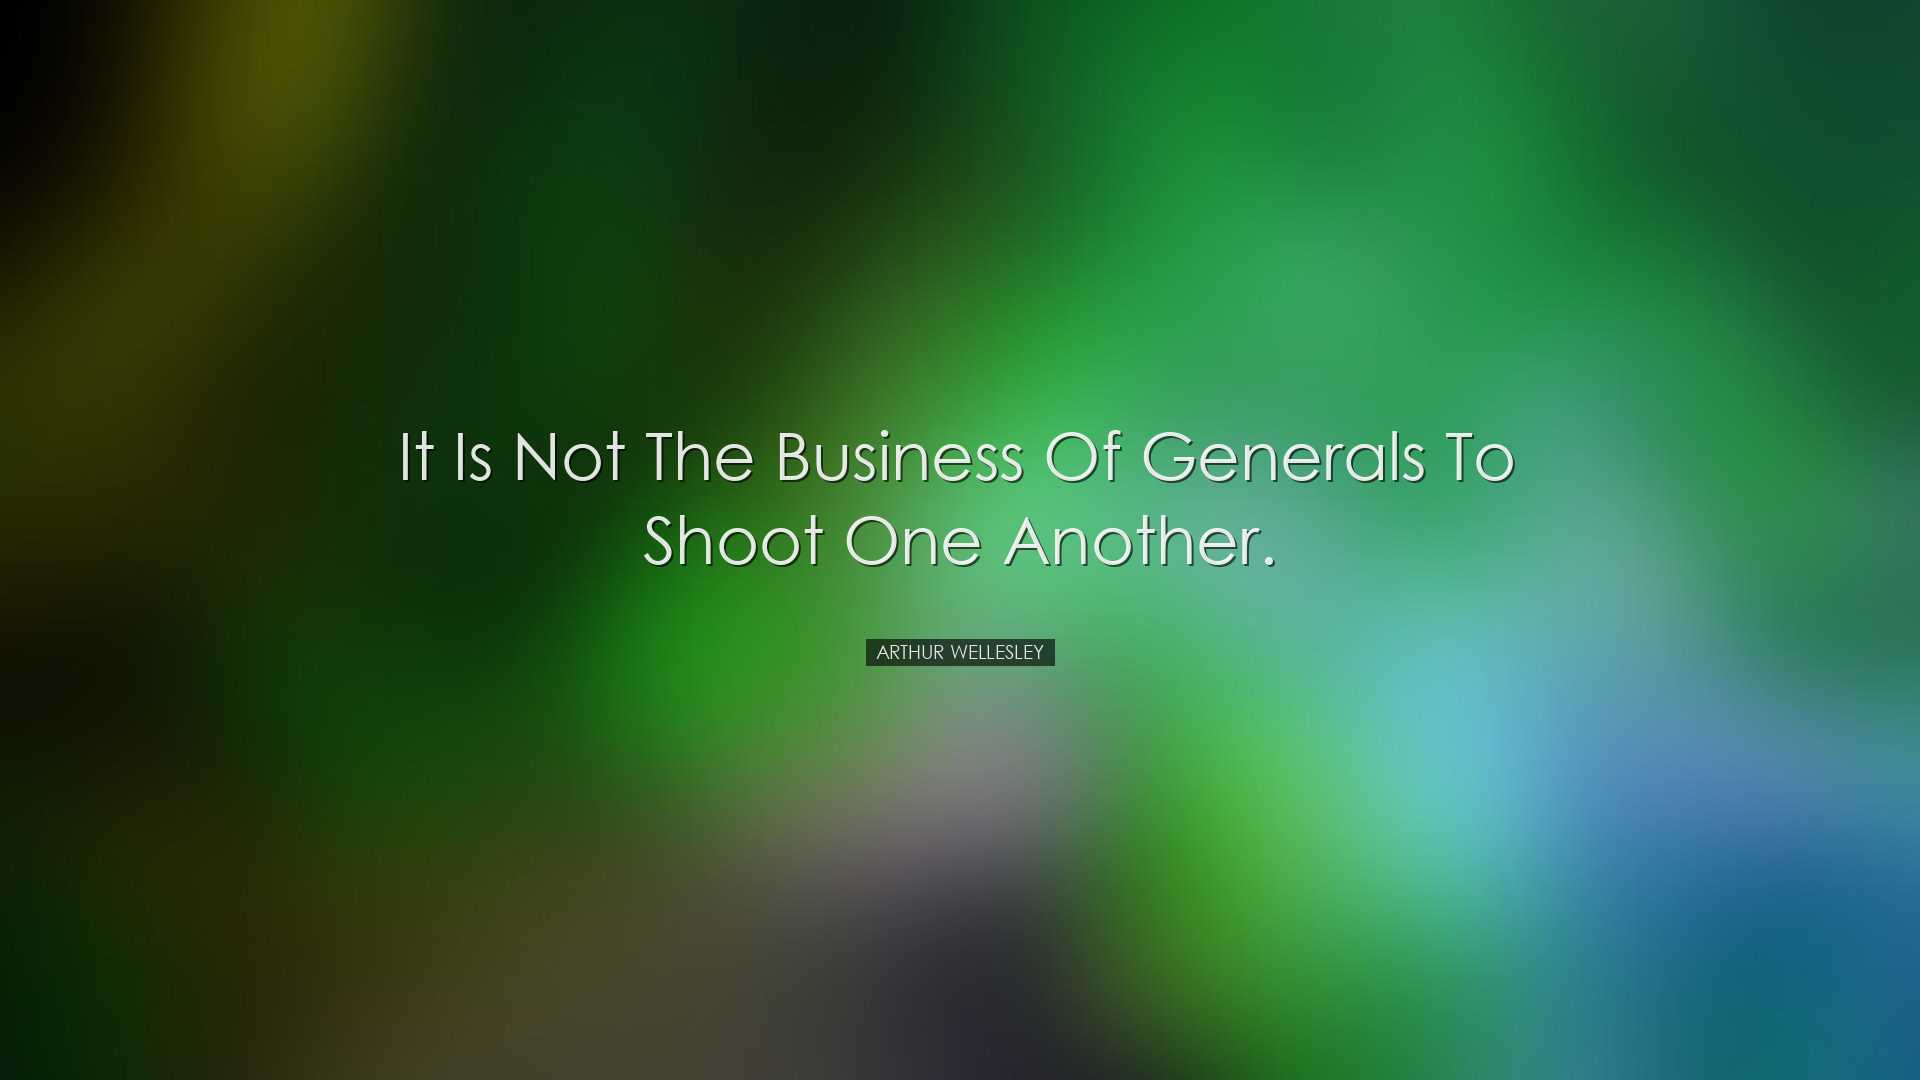 It is not the business of generals to shoot one another. - Arthur